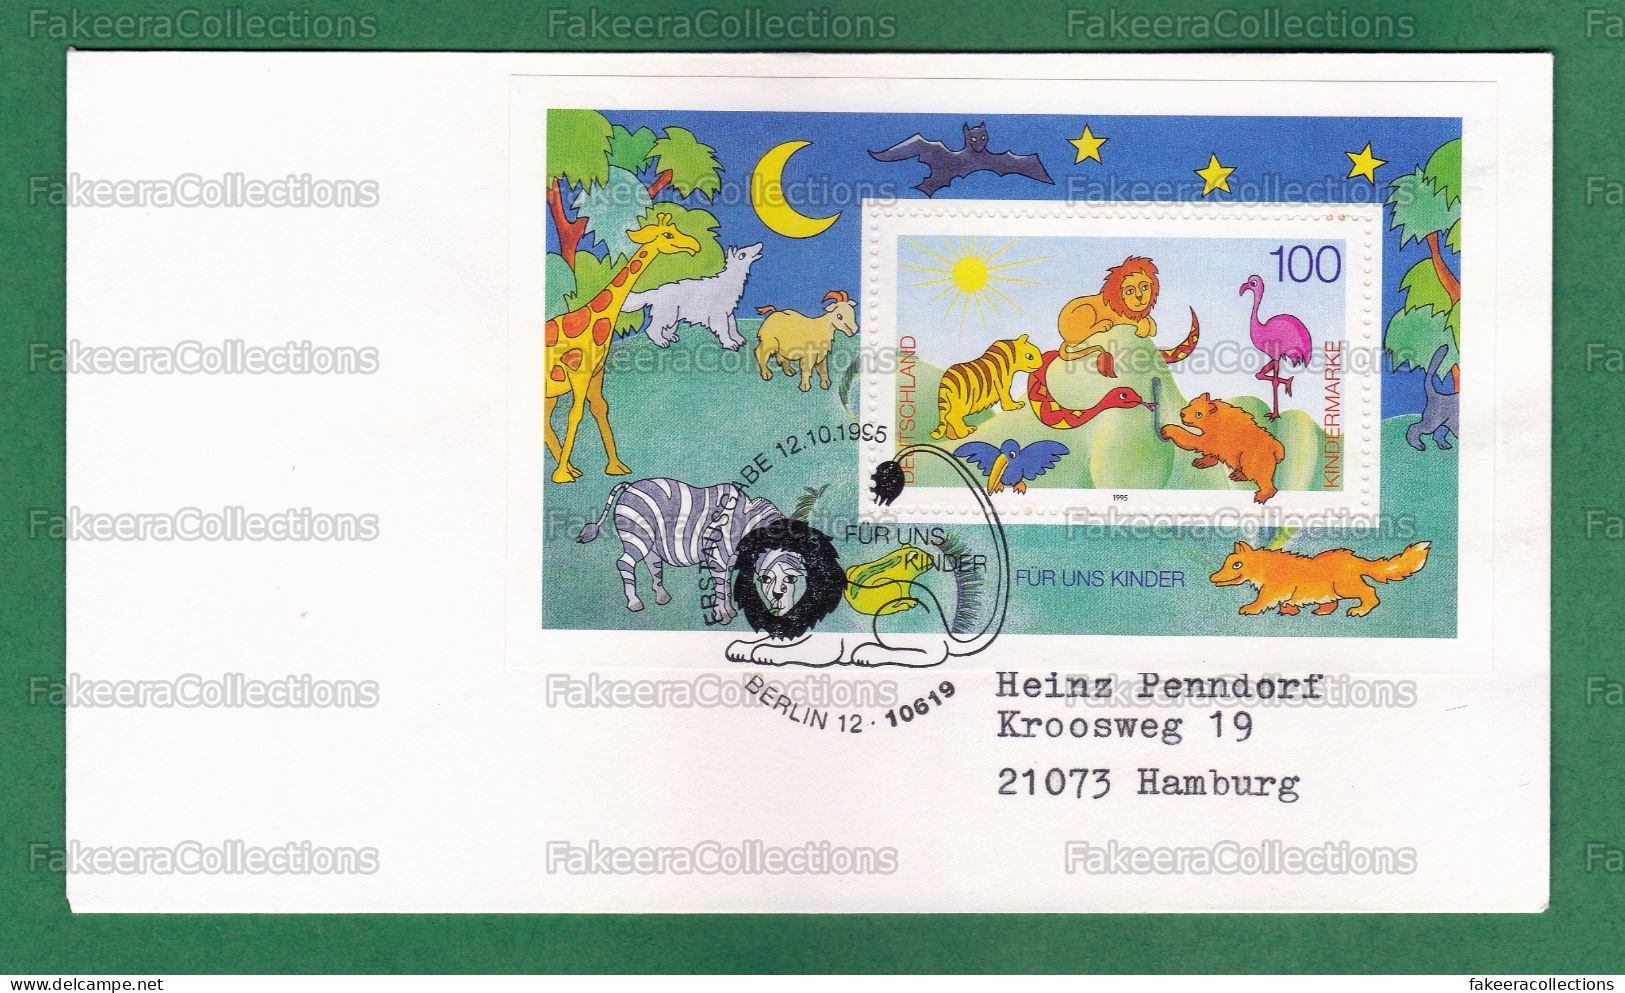 GERMANY 1995 - FOR THE CHILDREN 1v M/S FDC - Postal Used On Date Of Issue - Animals, TIGER, LION, SNAKE, BEAR, BIRDS - Big Cats (cats Of Prey)